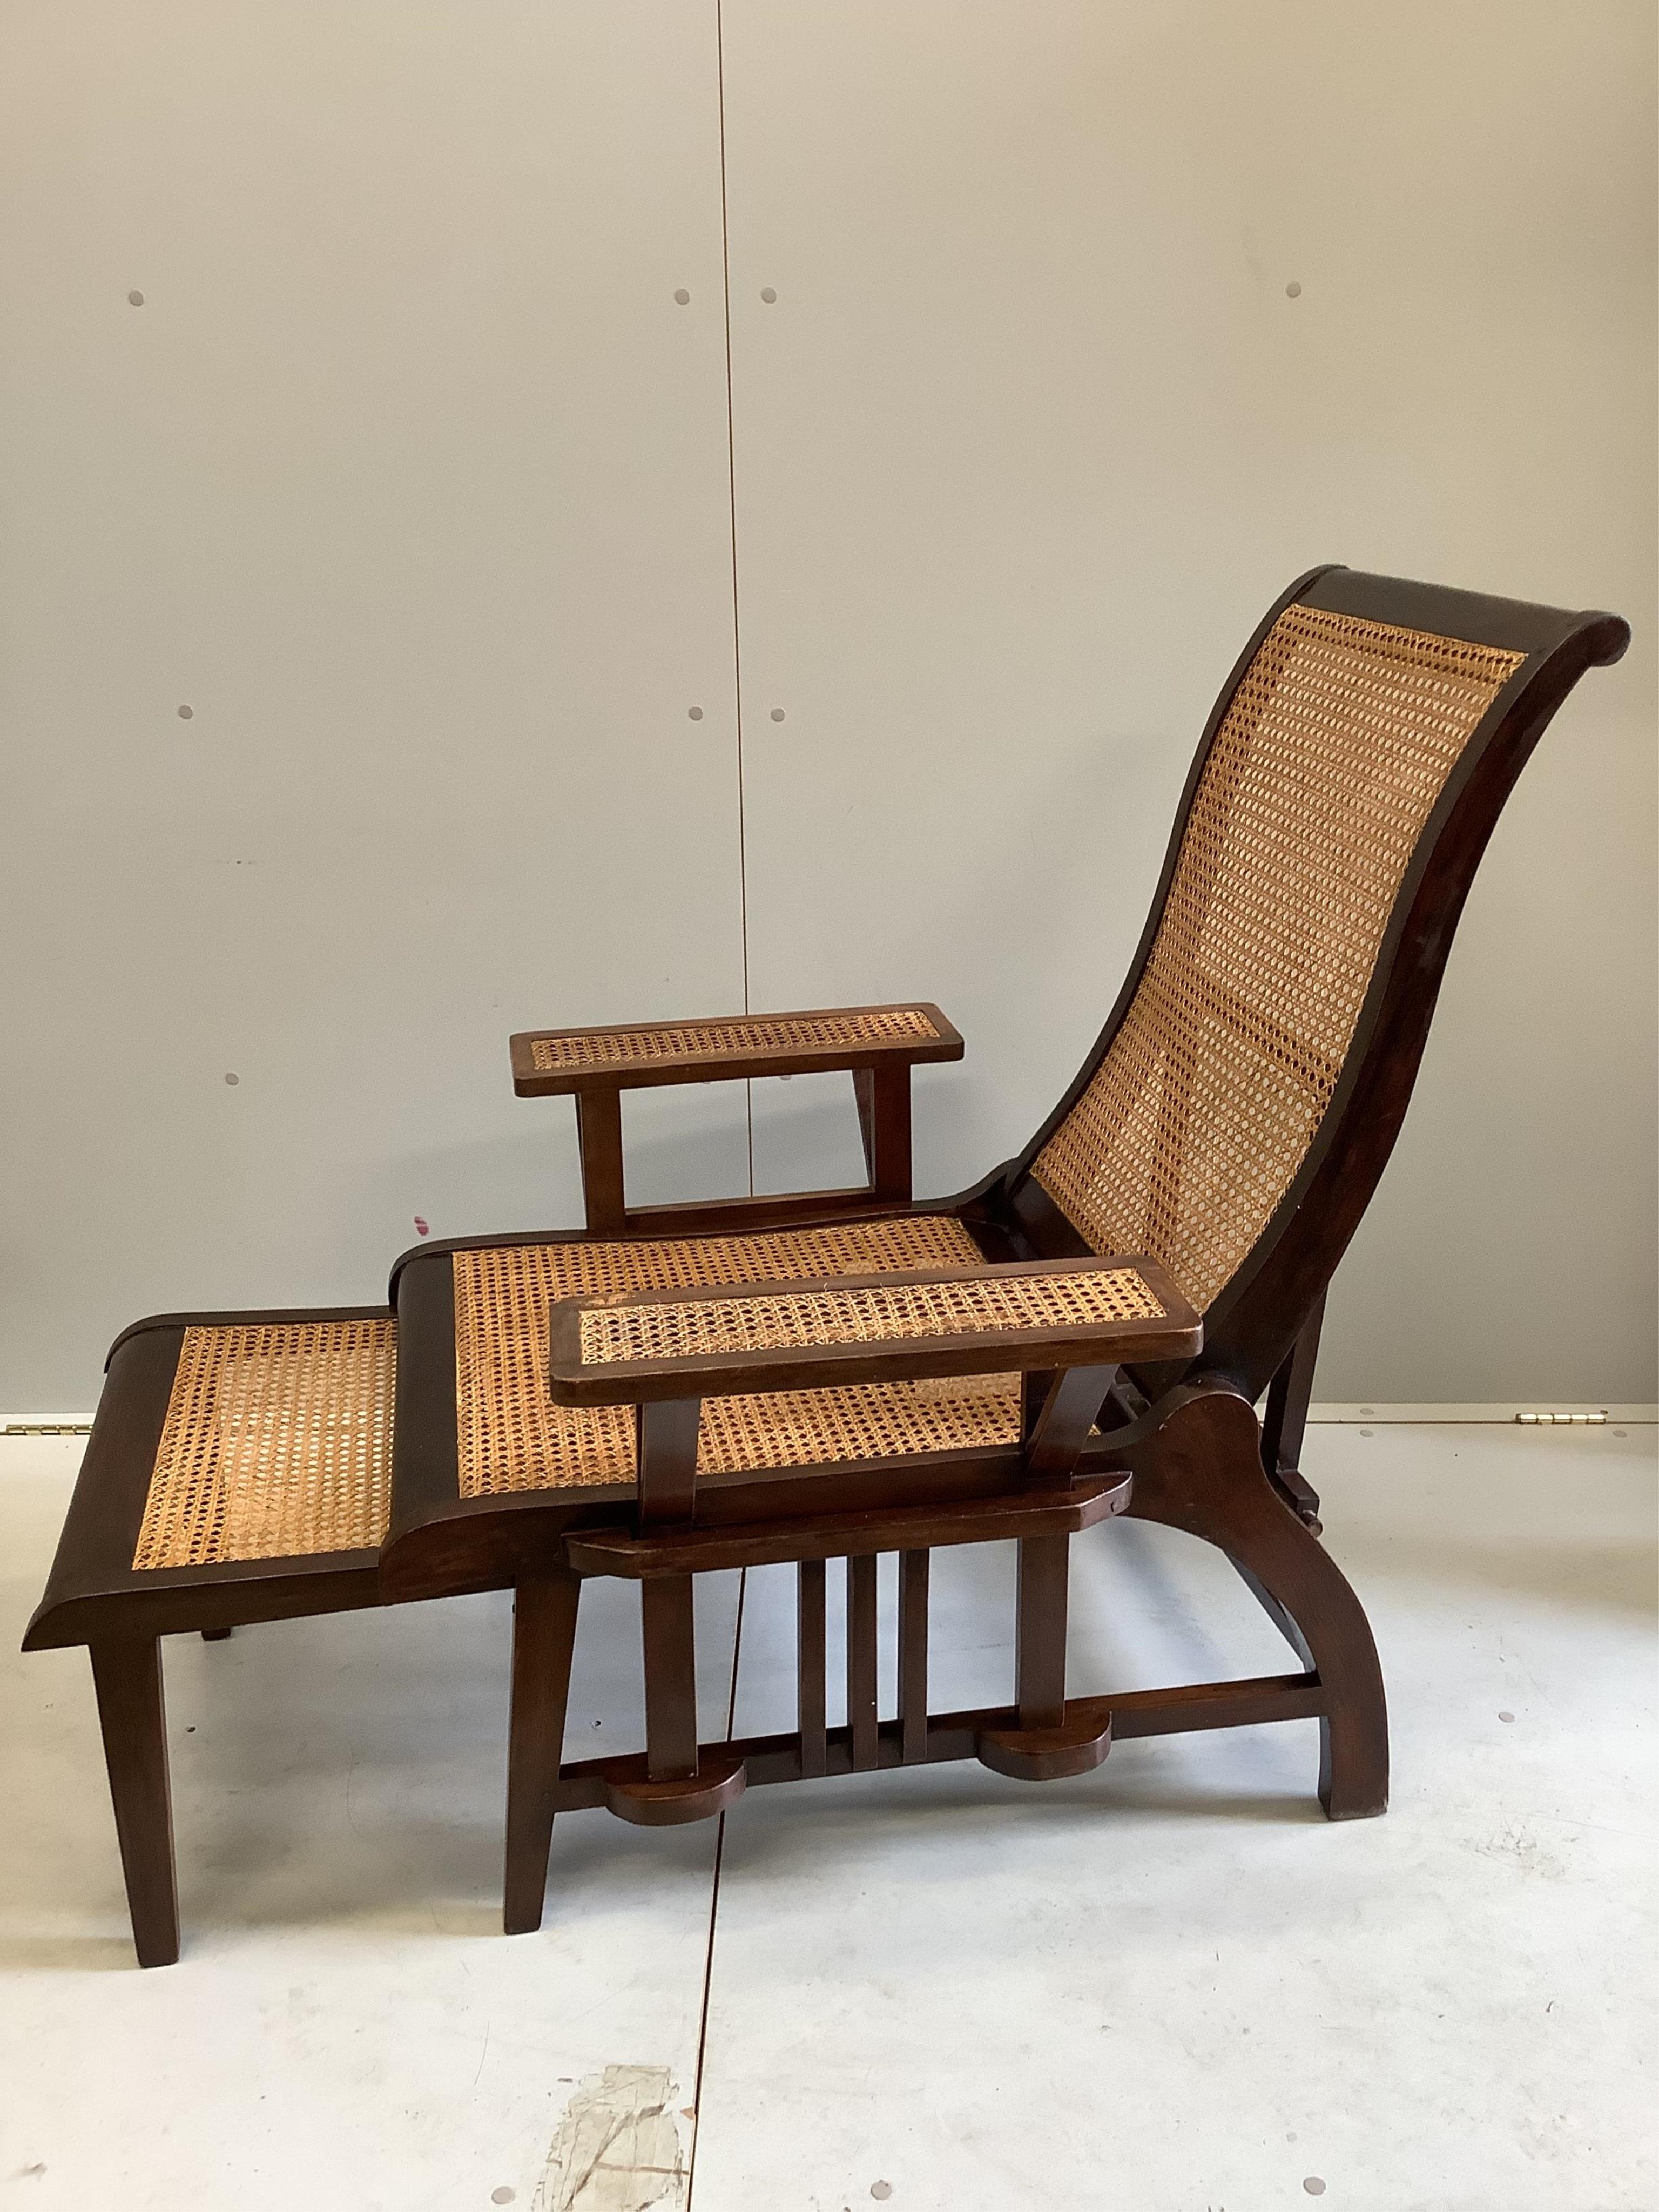 A pair of mid 20th century caned hardwood reclining garden chairs with integral sliding footrests and detachable armrests, width 85cm, depth 90cm, height 106cm. Condition - good